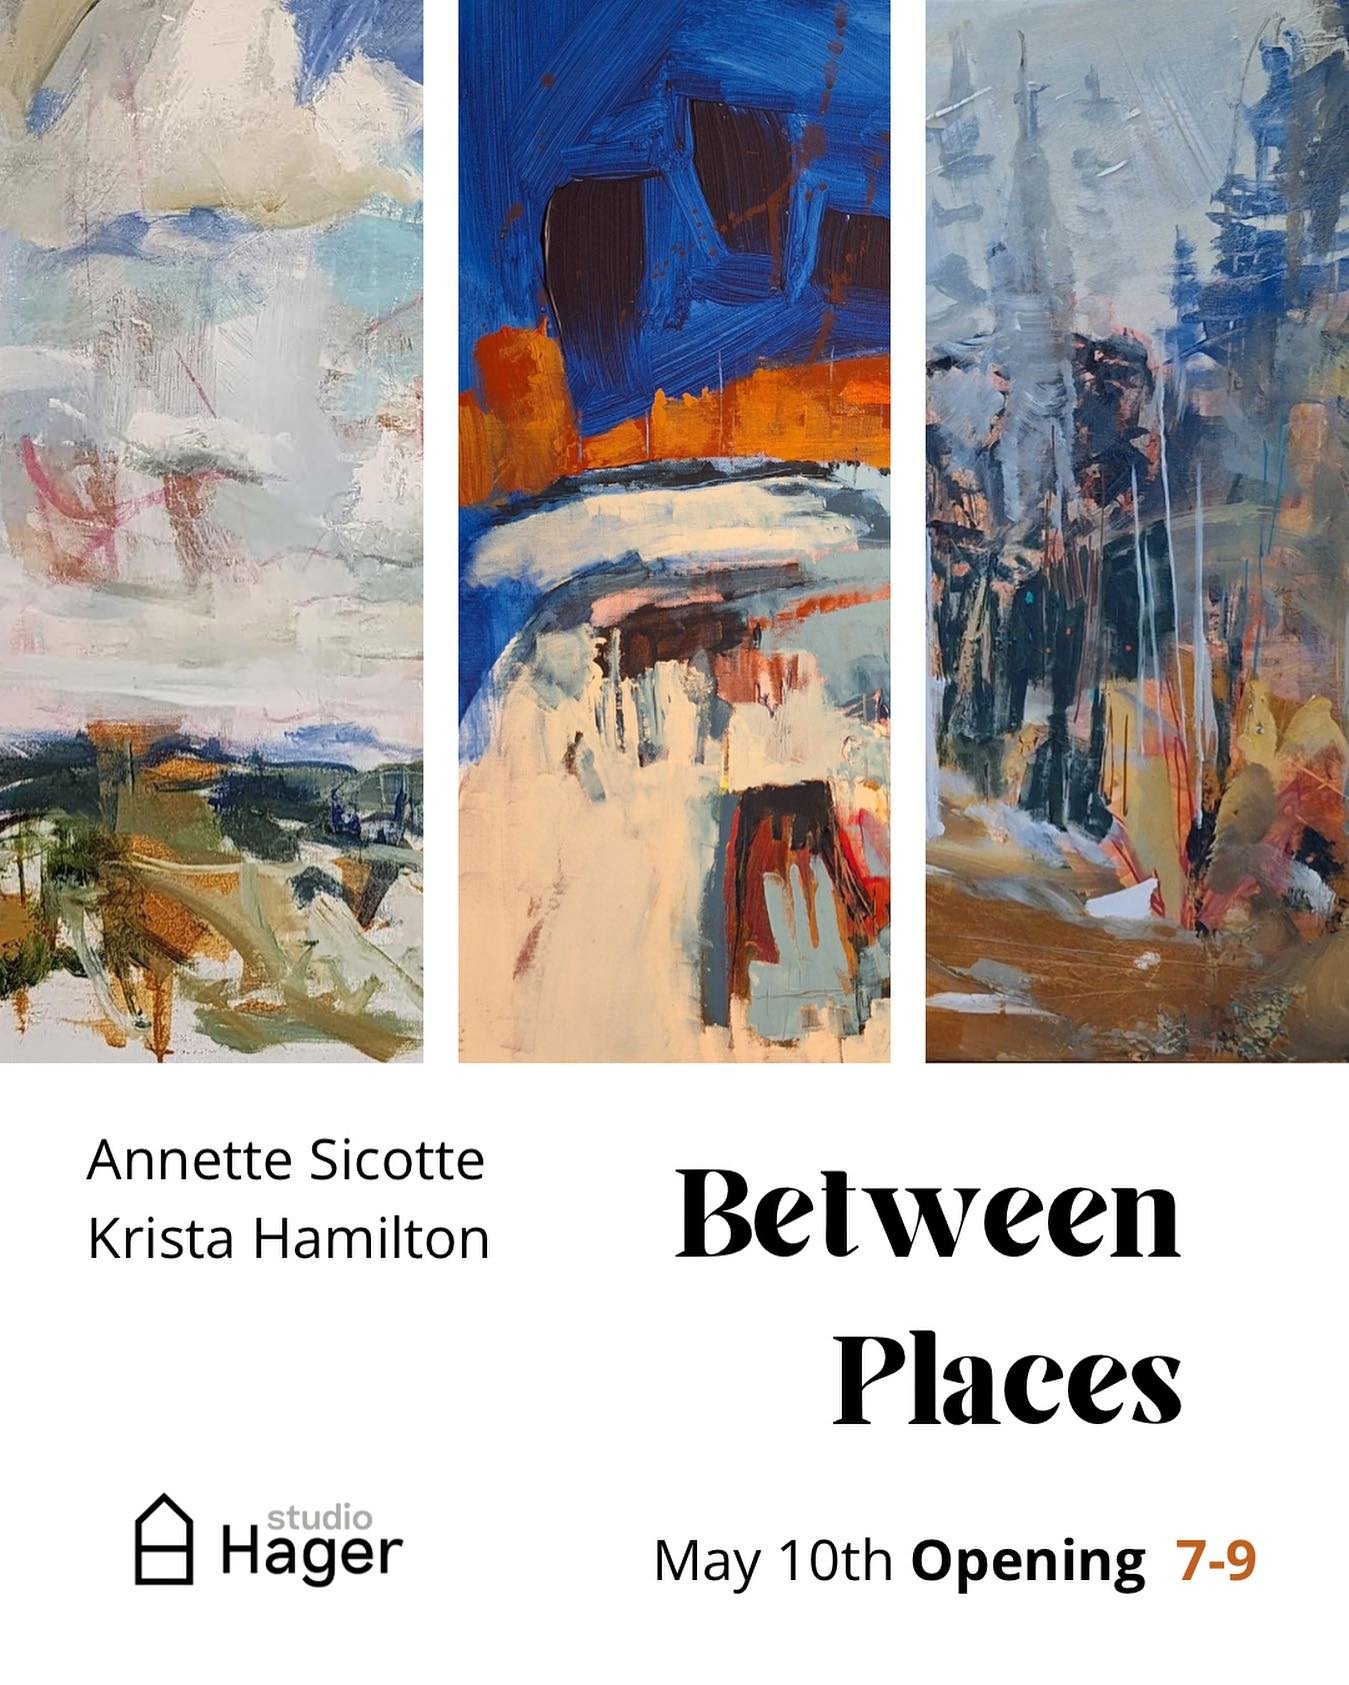 YOU&rsquo;RE INVITED
Join us this a Friday May 10th 7-9 for the opening of &lsquo;Between Places&rsquo; 

Studio Hager 
13B Fairway Drive 

@annettesicotte 
@krista_paints